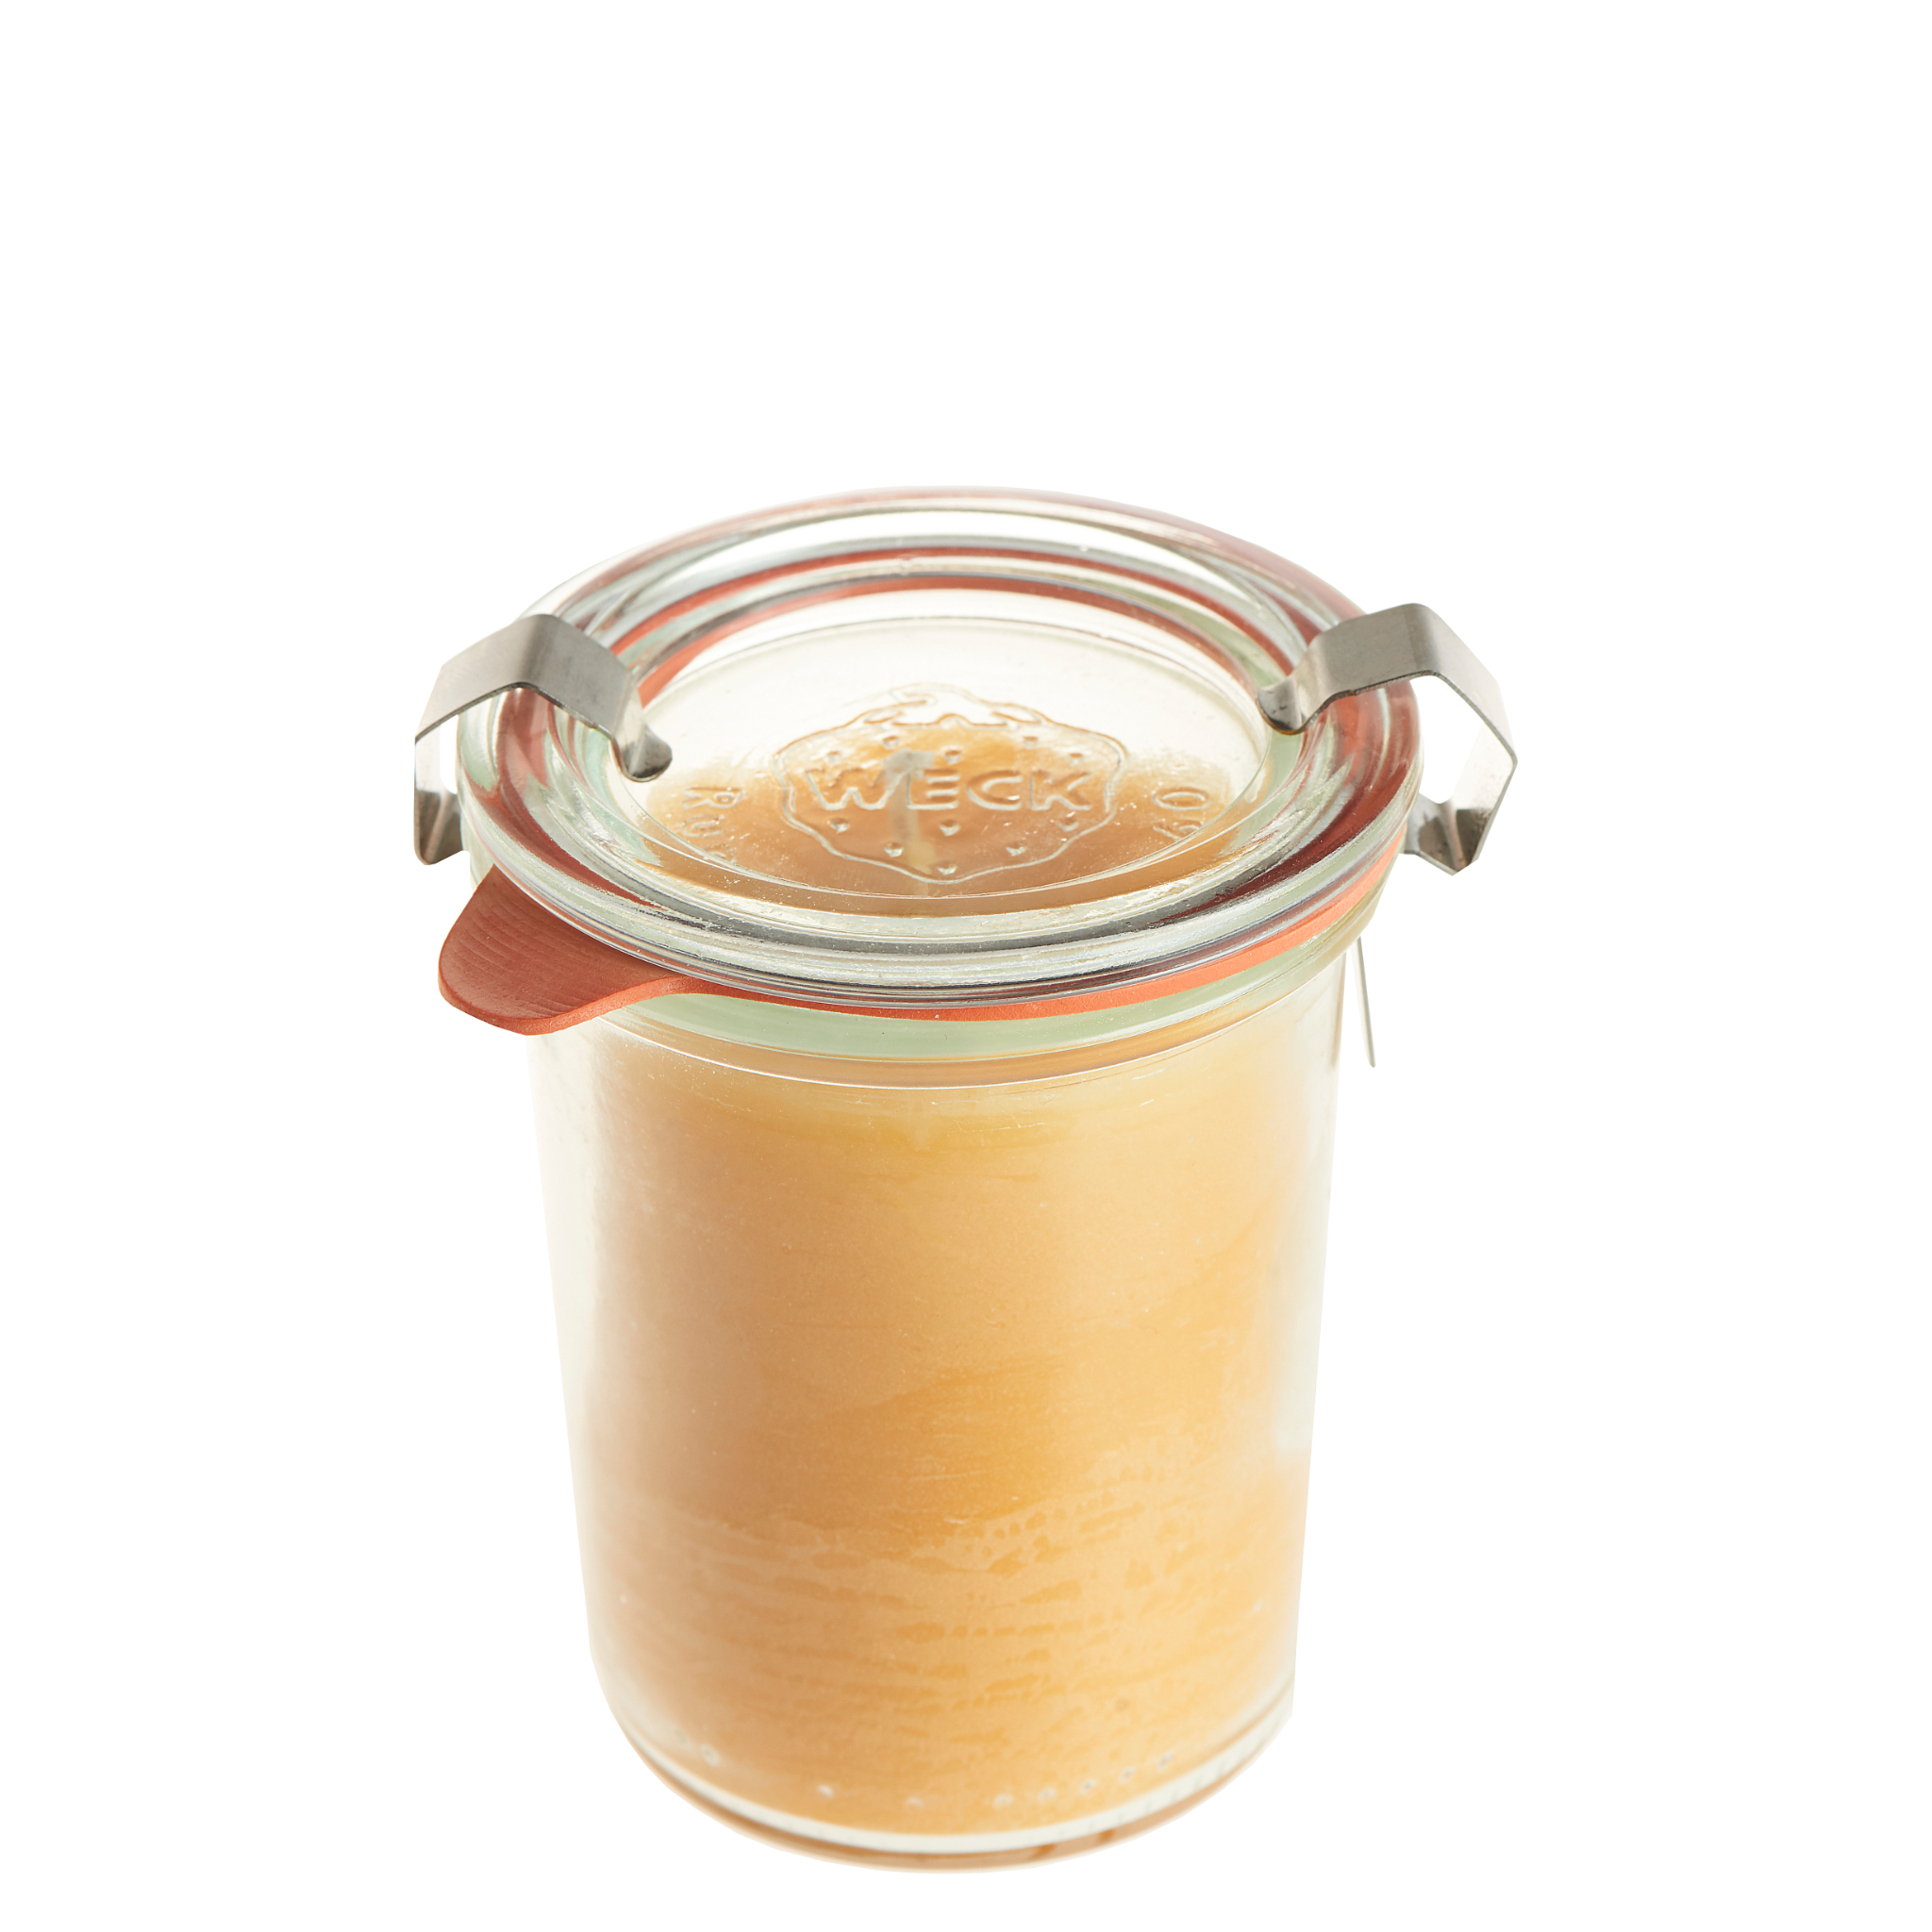 34802 Beeswax Glass Candle (160ml), x 6